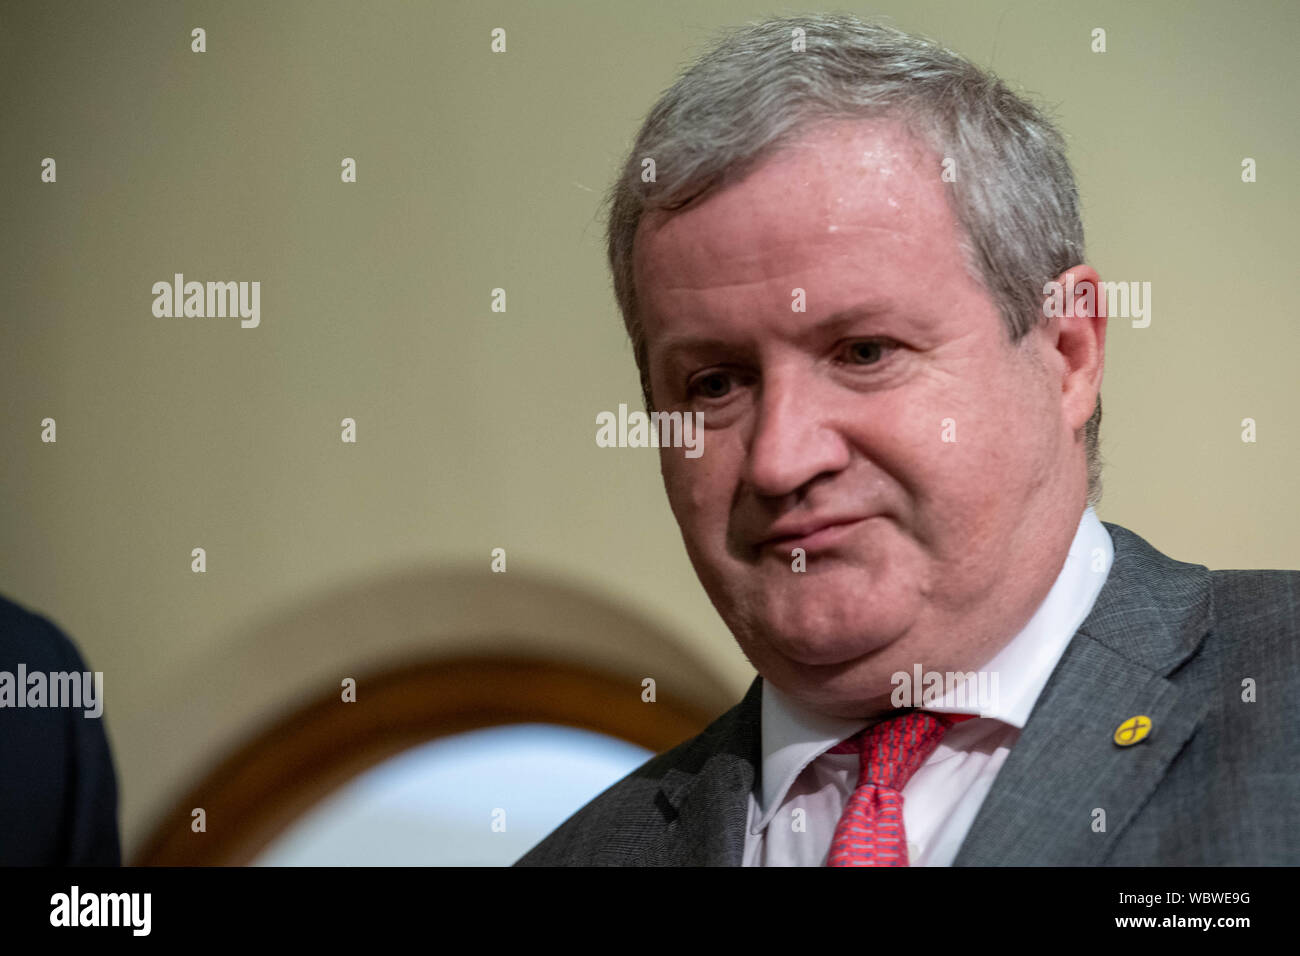 London, UK. 27 August 2019.  Church House declaration meeting of UK opposition leaders and MP's signing a declaration against the shutting down of parliament by Boris Johnson MP PC Prime Minister. Ian Blackford MP, leader of the SNP in the House of Commons, Credit Ian DavidsonAlamy Live News Stock Photo